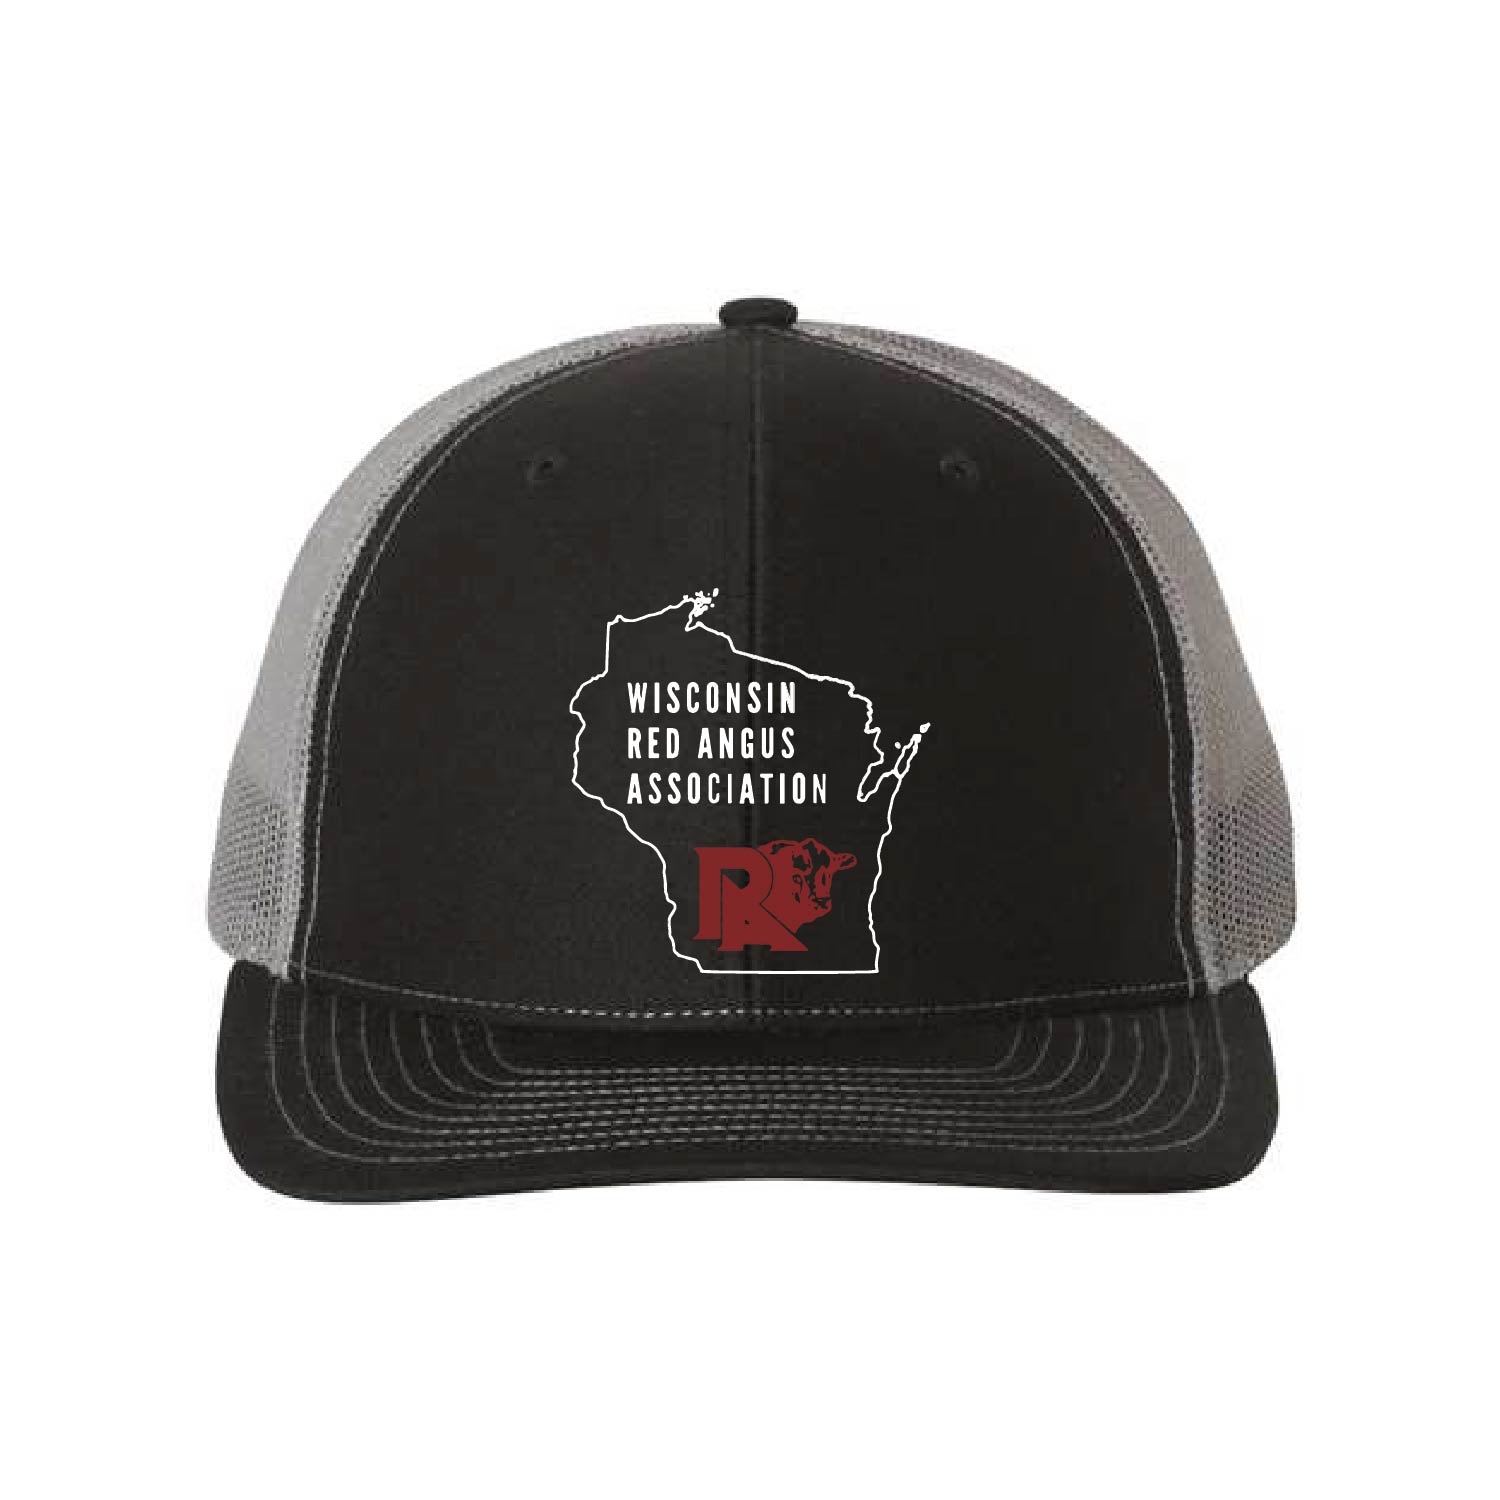 WI Red Angus Assoc Hats